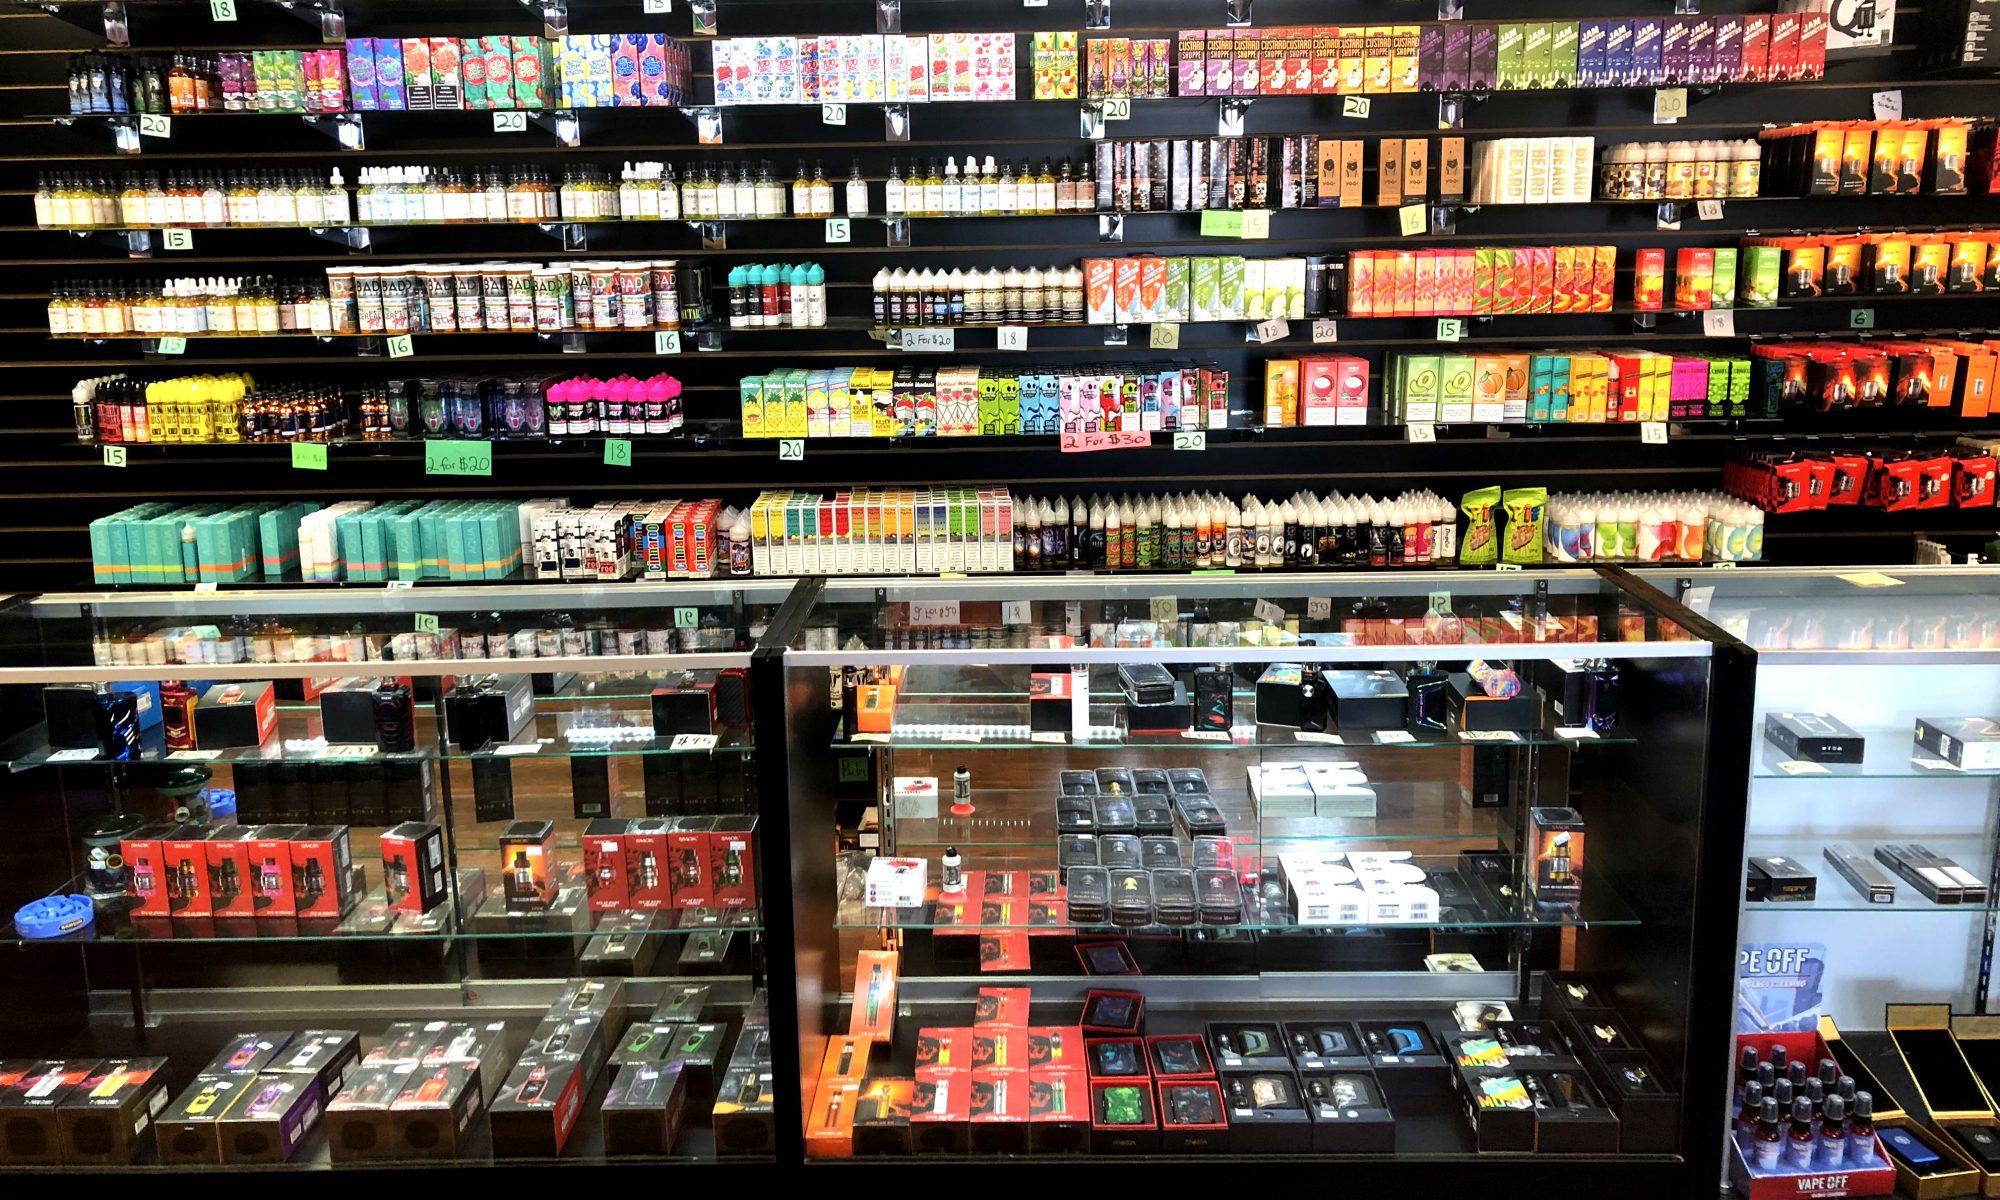 Glass shelves and wall display with e-juice and vaporizer selection in Parker, CO vape shop